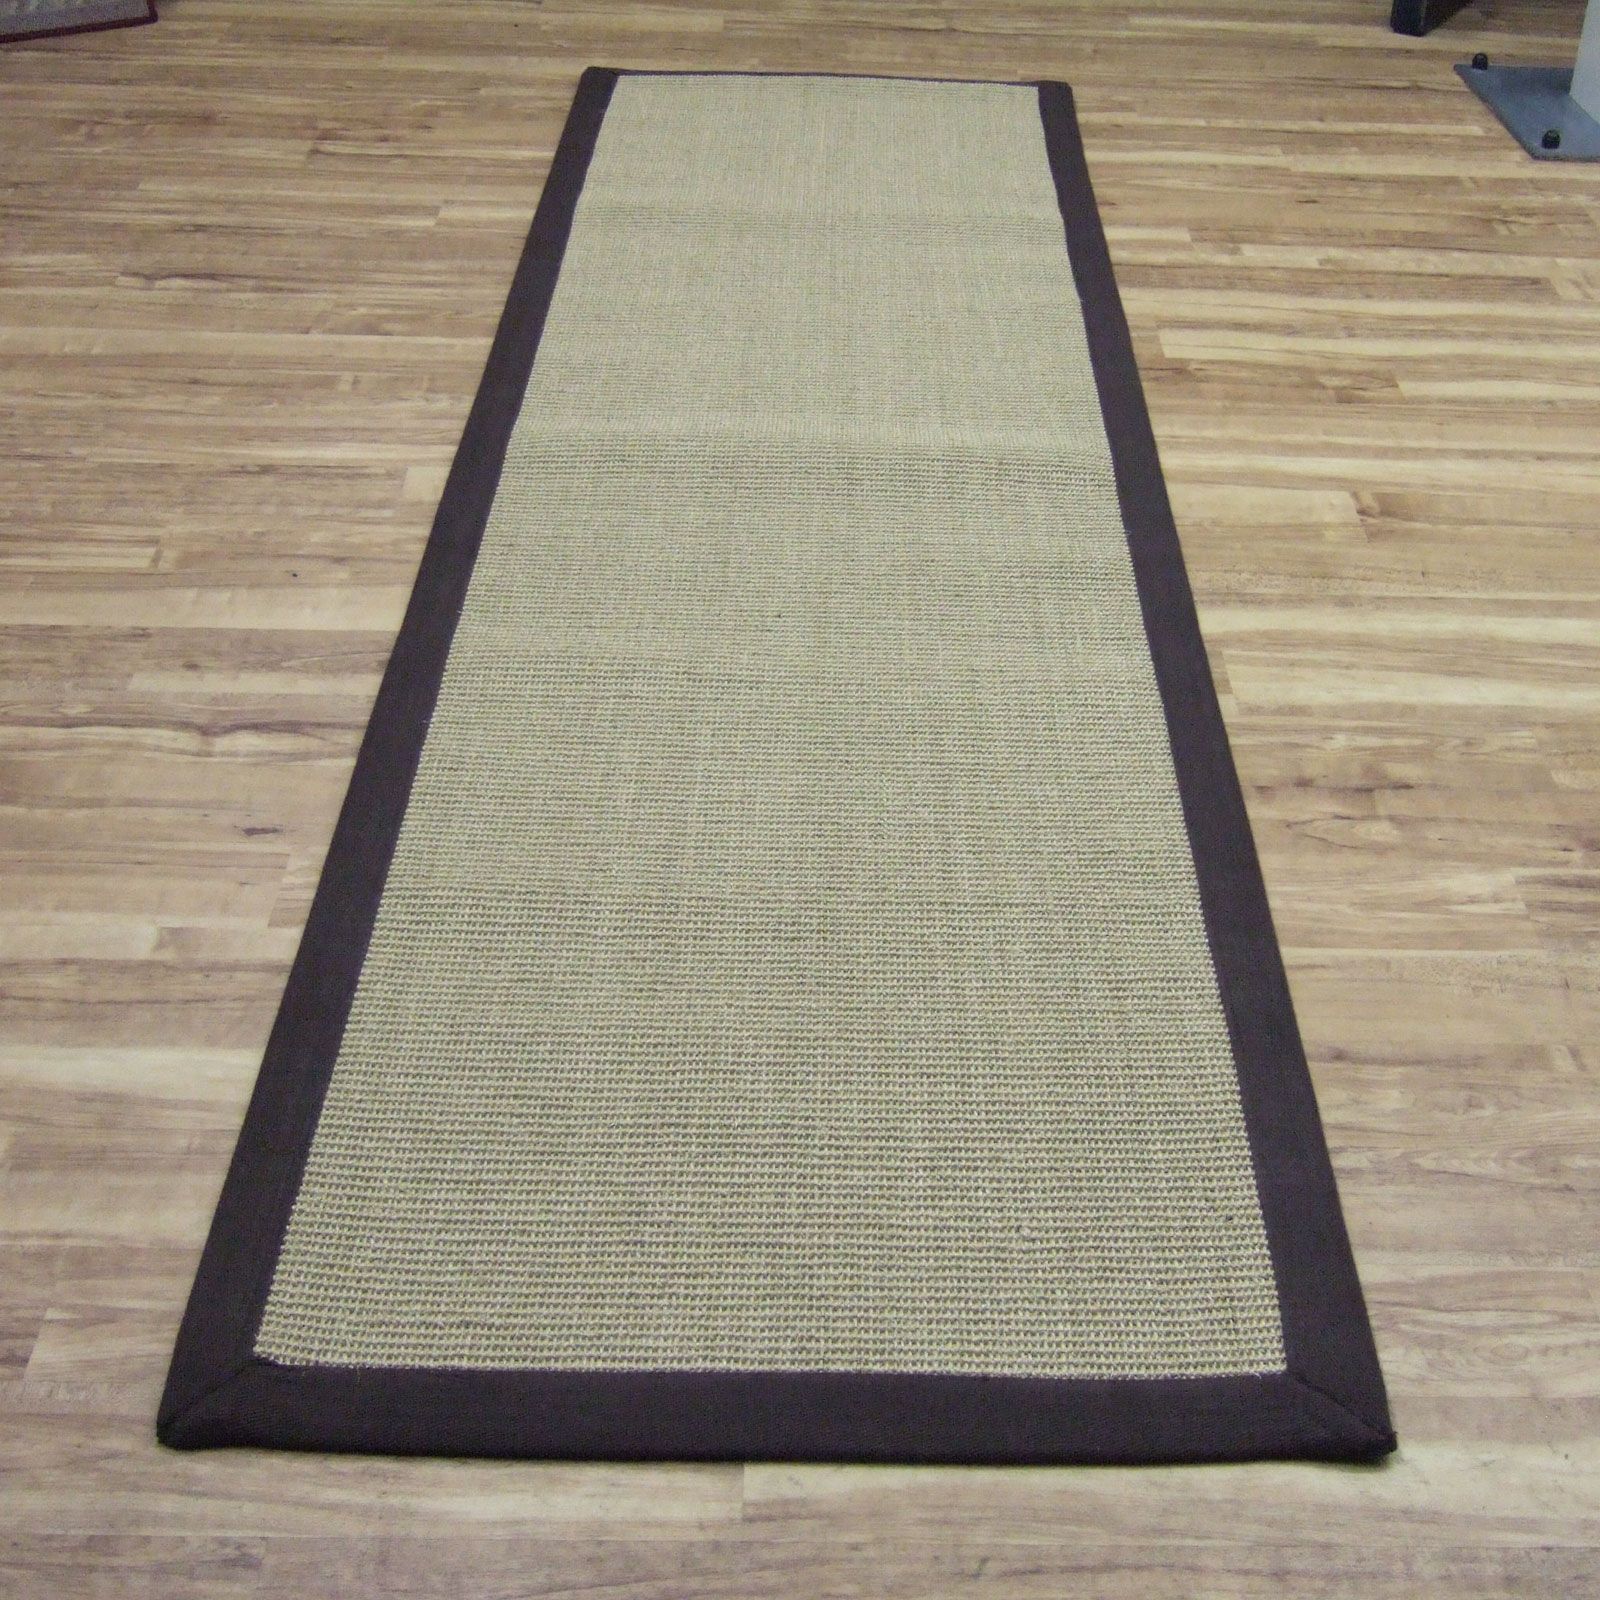 Hall Rugs Uk Roselawnlutheran Inside Modern Runners For Hallways (View 14 of 20)